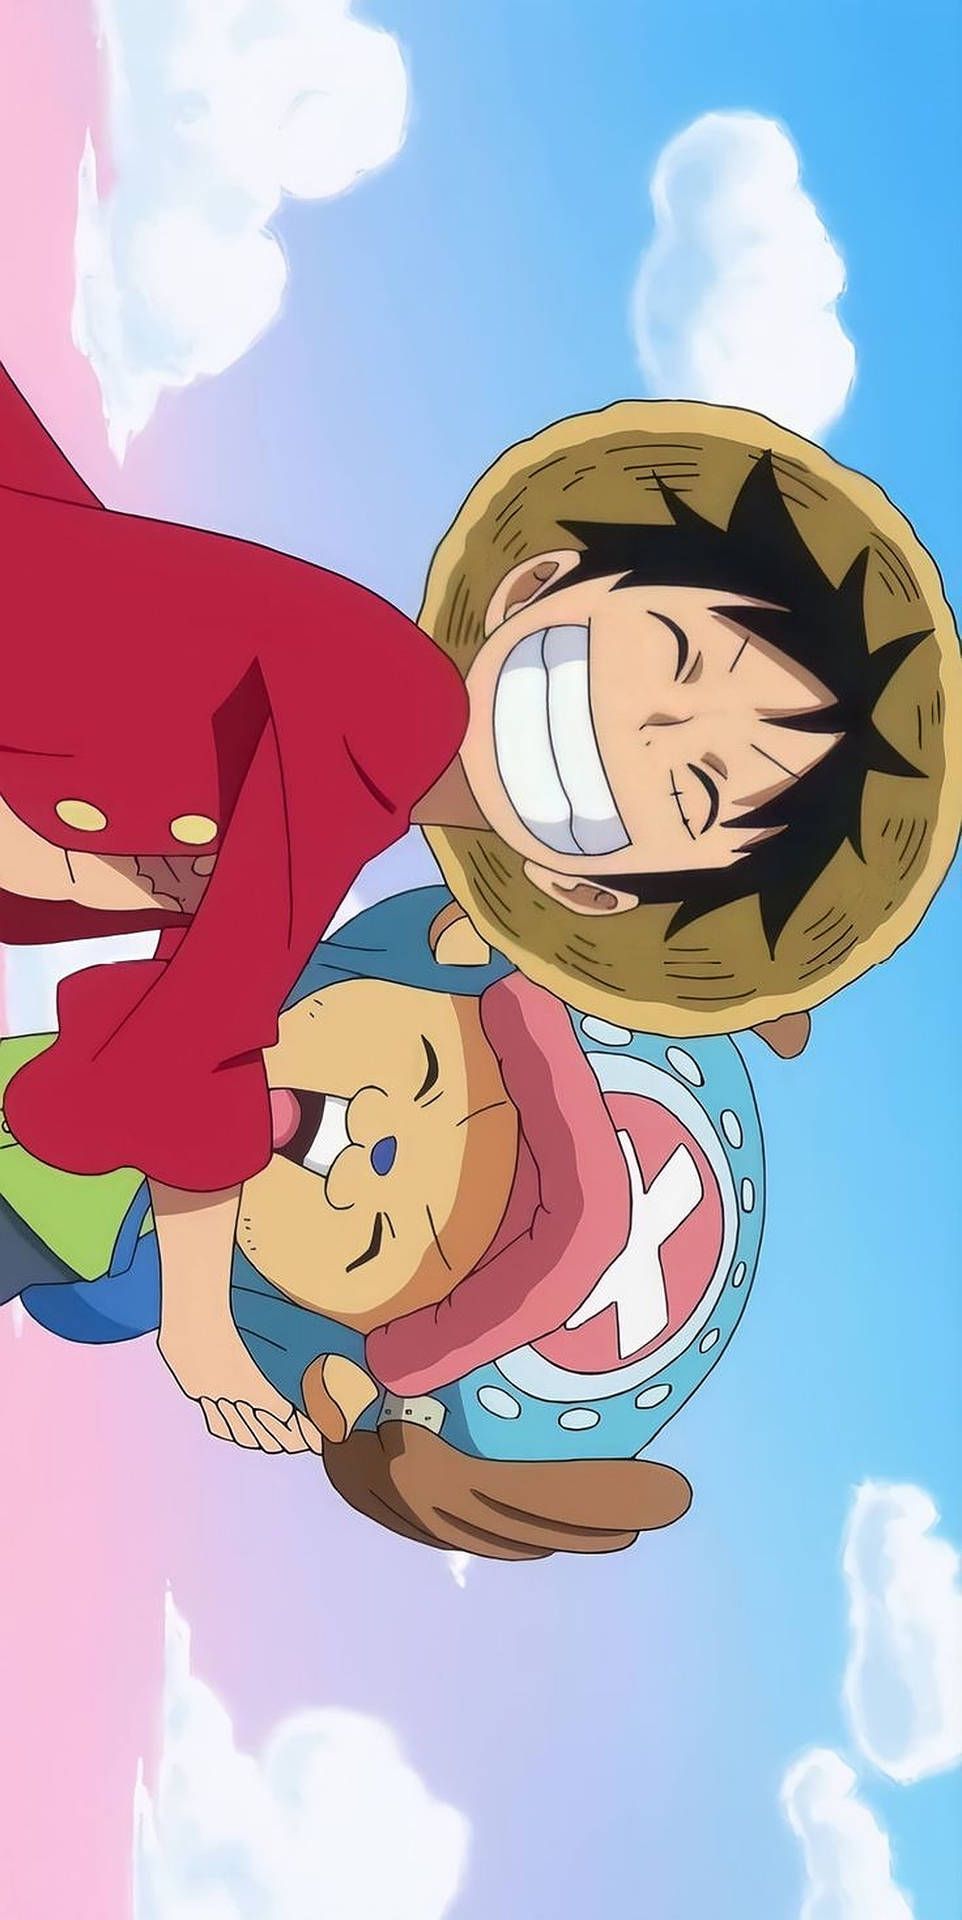 Caption: Luffy And Chopper From One Piece On Iphone